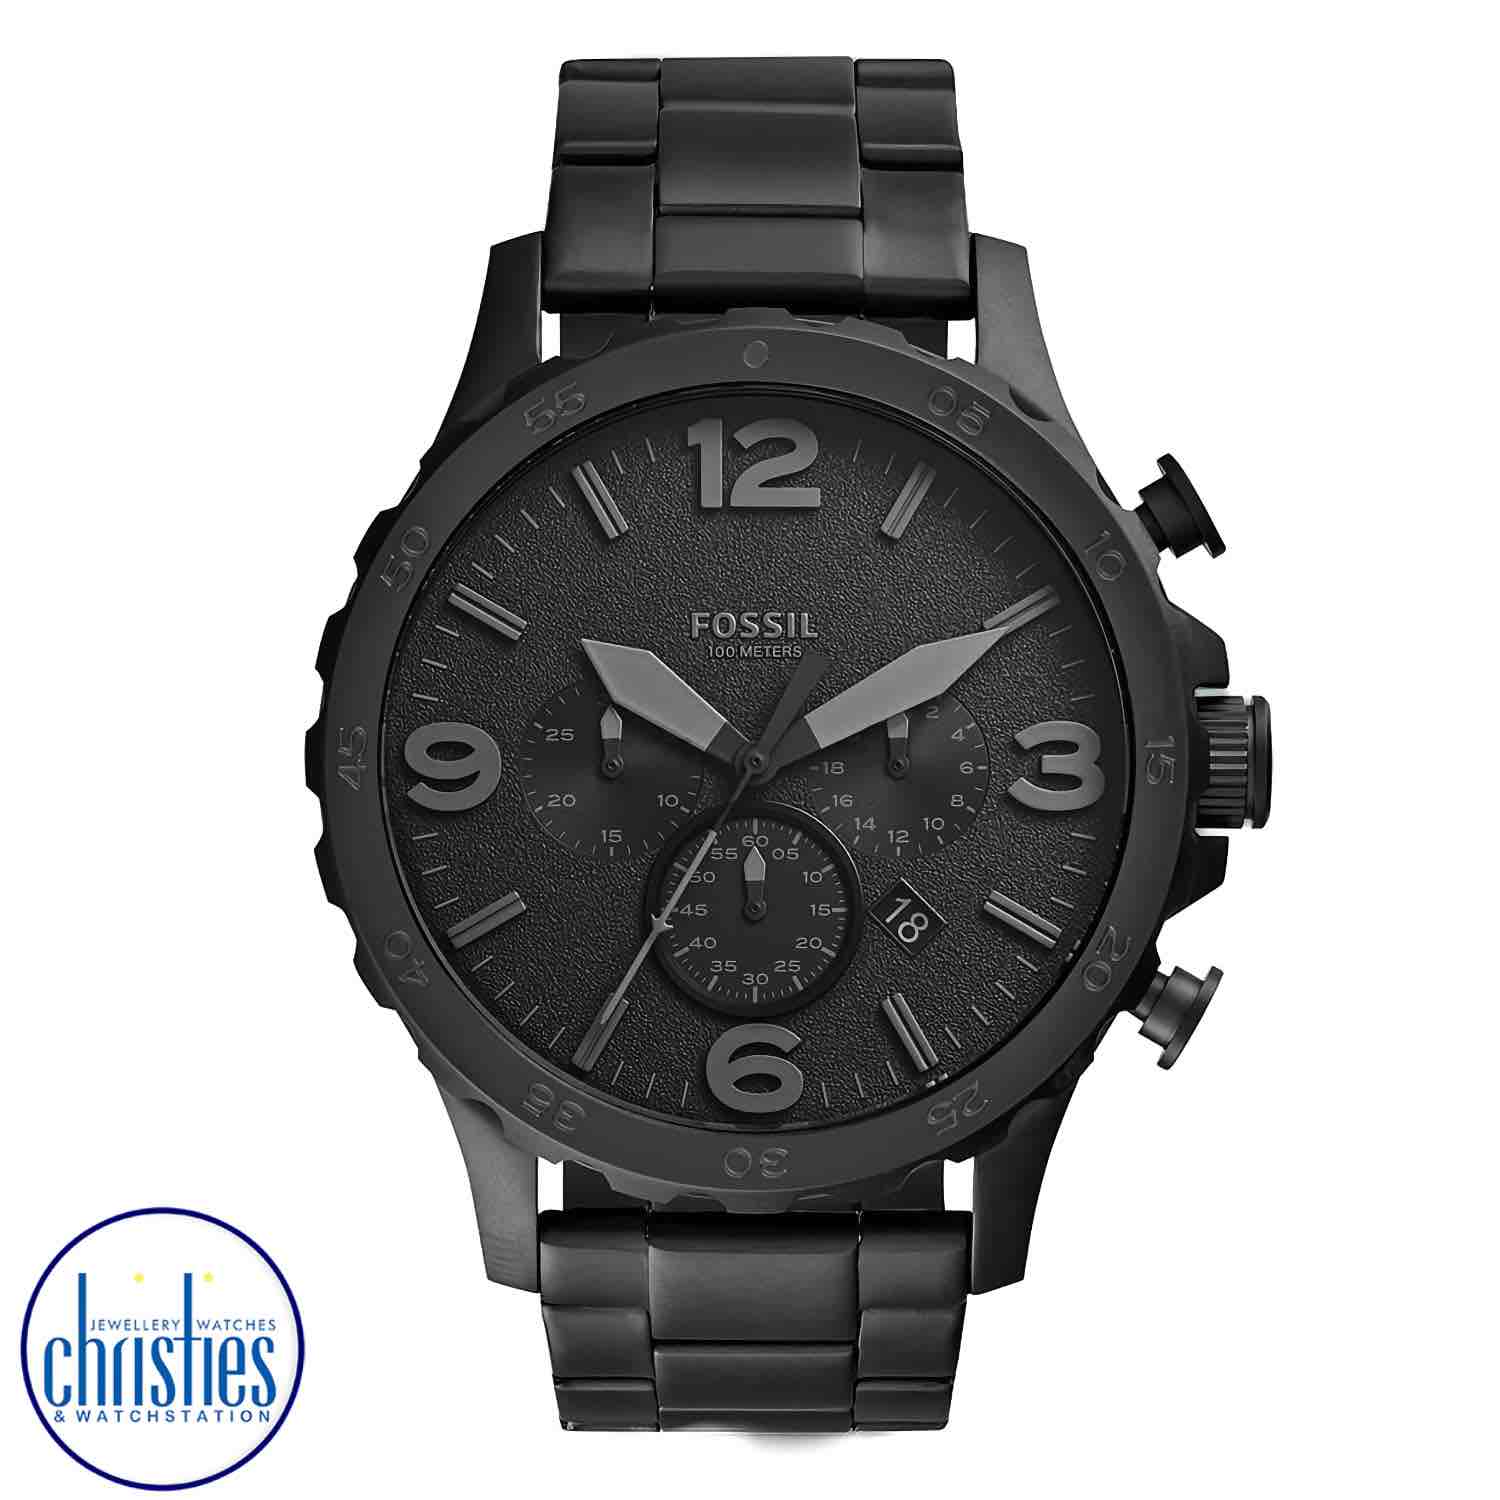 JR1401 Fossil Nate Chronograph Black Stainless Steel Watch 